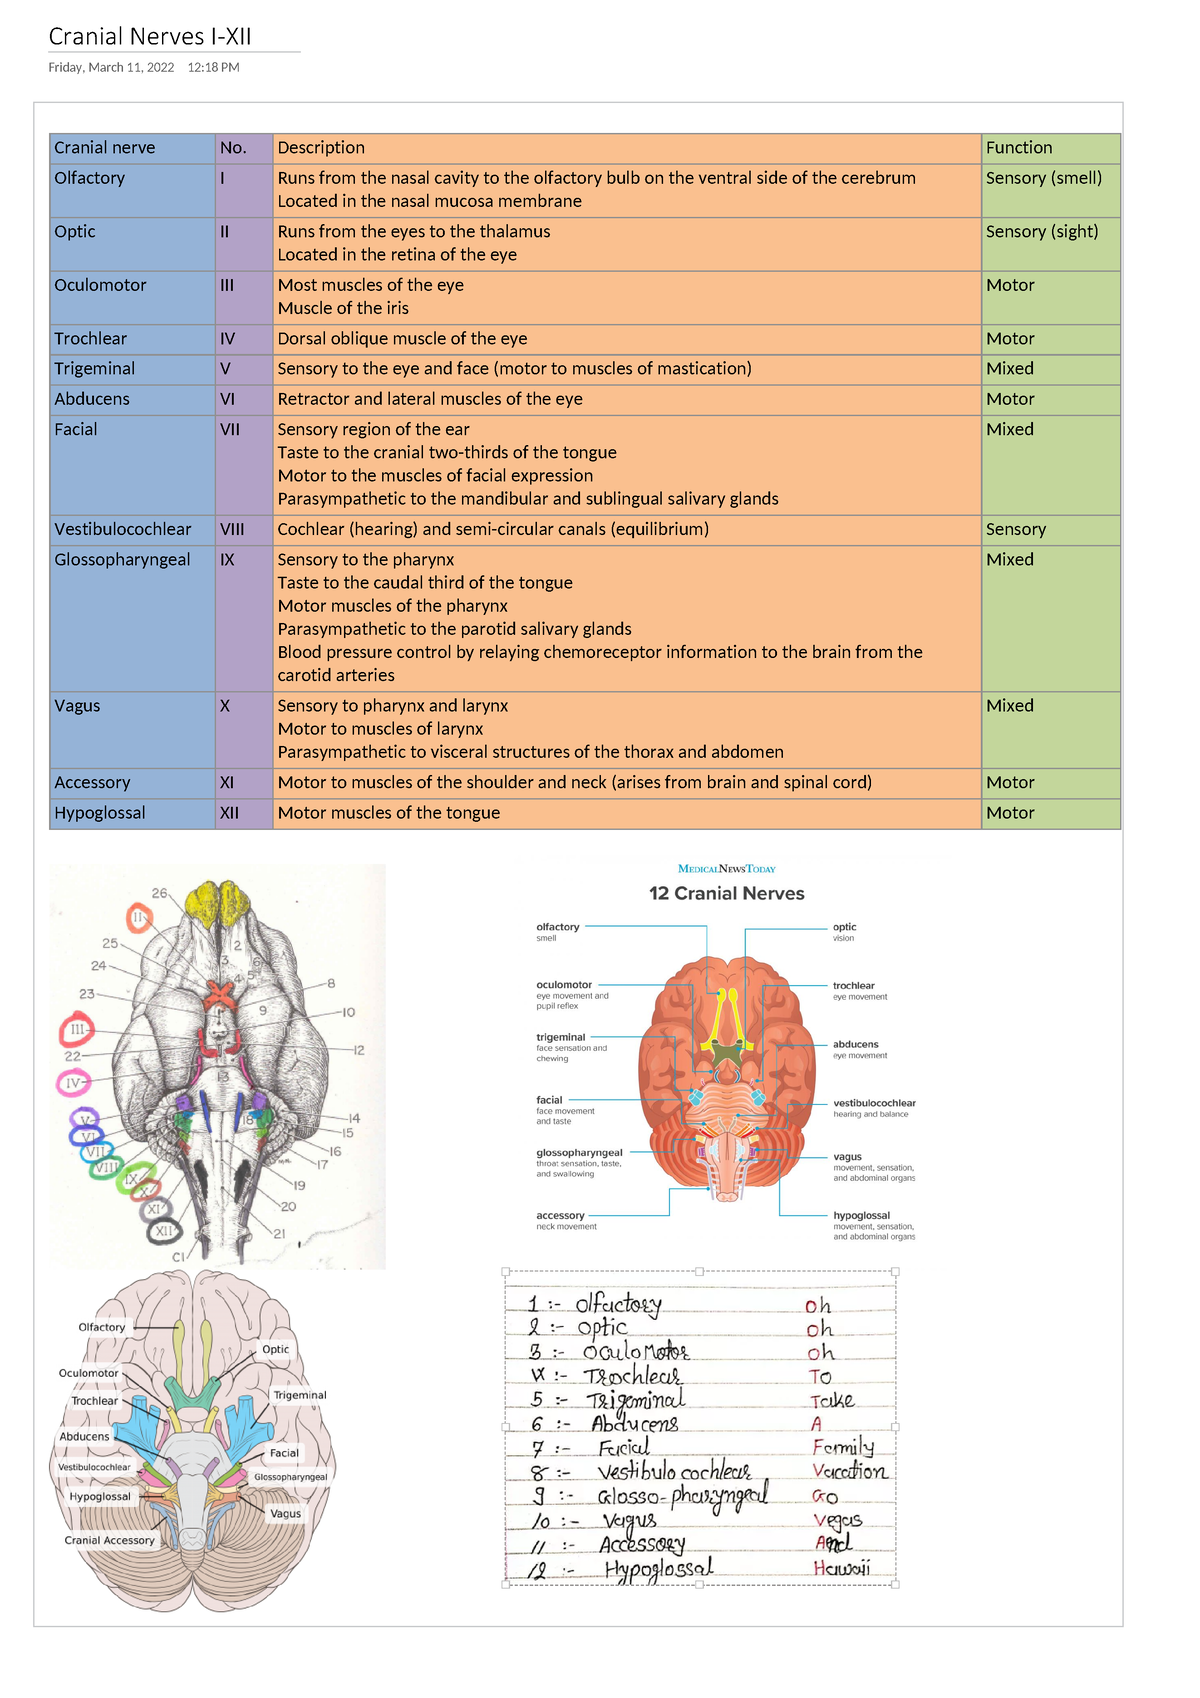 Cranial Nerve Summary Table Cranial Nerves I Xii Friday March 11